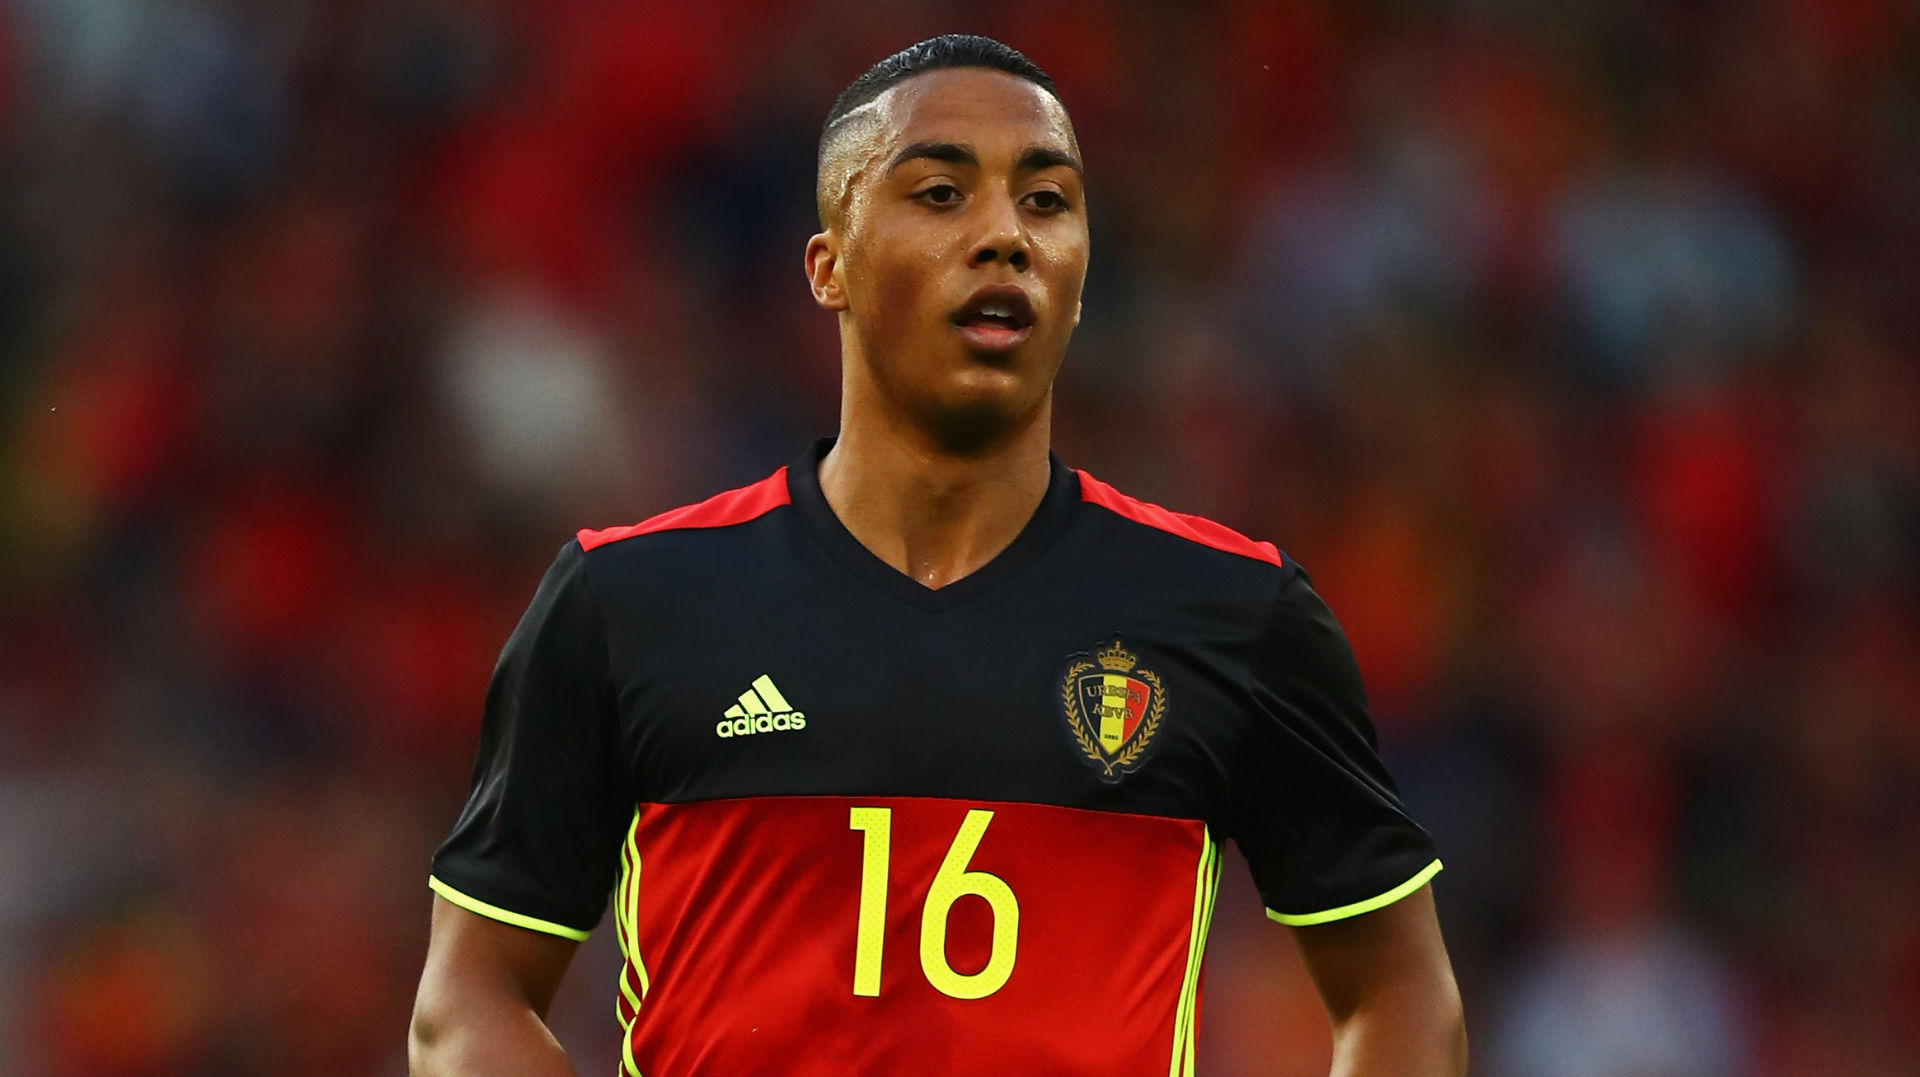  Youri Tielemans is a Belgian midfielder who plays for Leicester City and the Belgium national team. He is known for his skill, passing, and shooting ability.